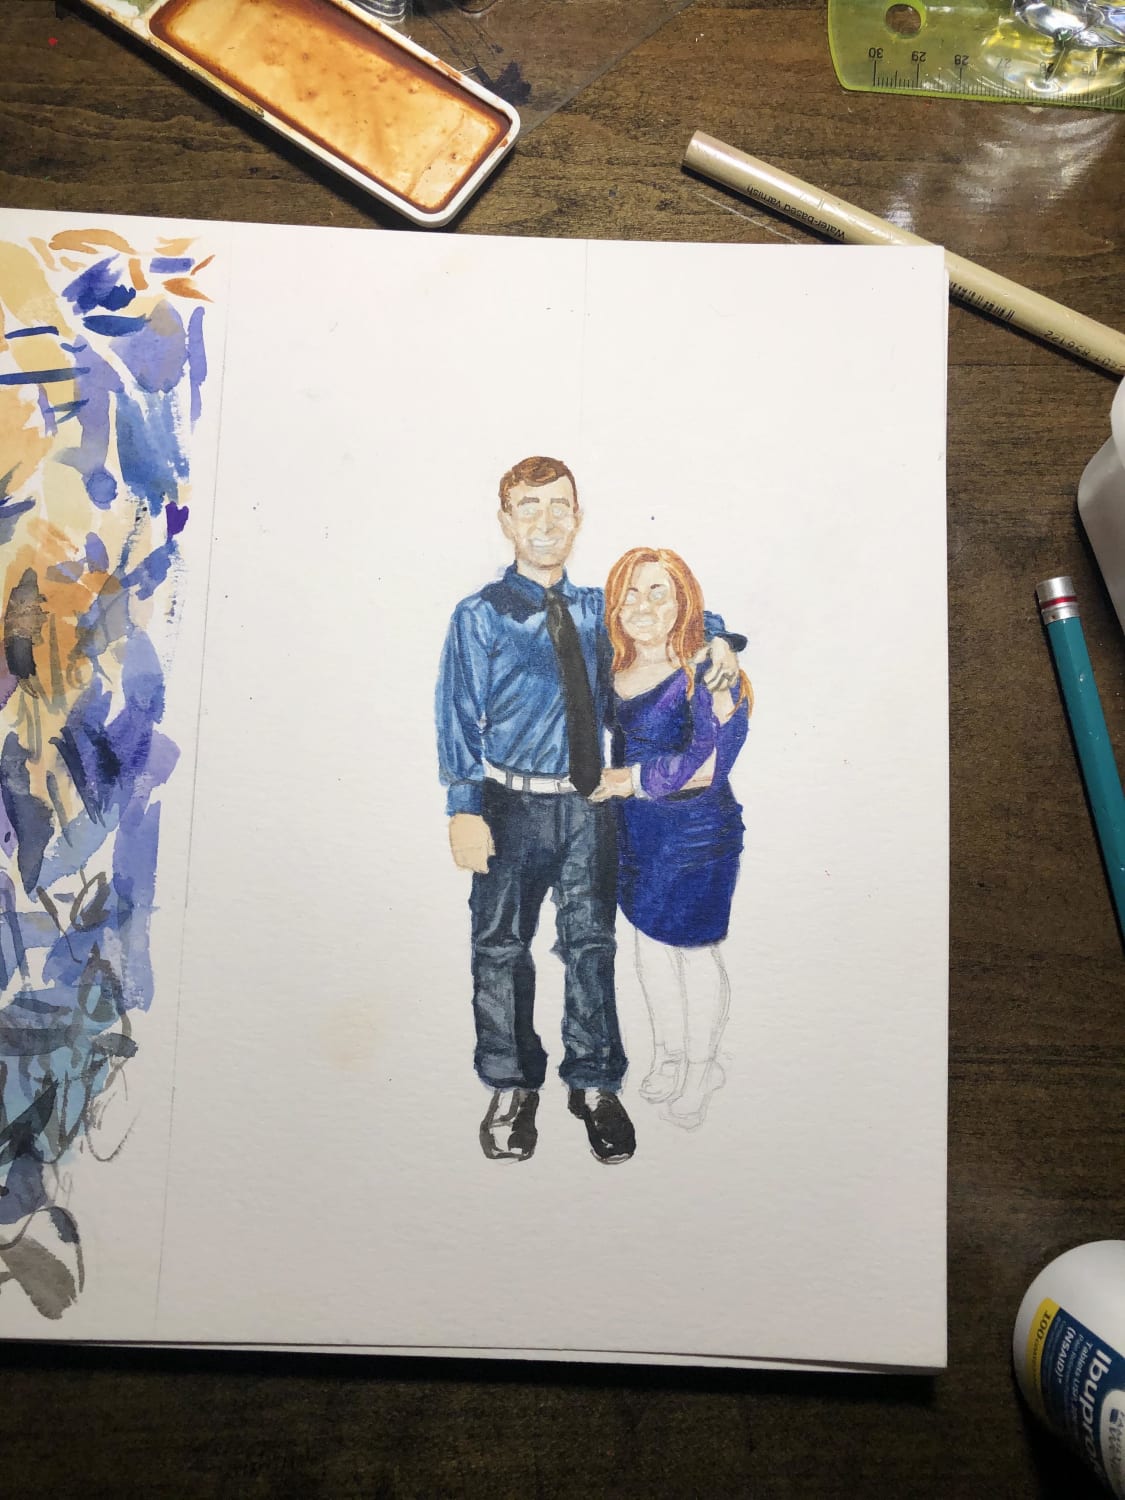 I’m terribly anxious about posting this. I’ve always been more comfortable holding a pen/pencil but recently decided to get out of my comfort zone and try something new. It’s still a wip, but here’s one of my first attempts at watercolor